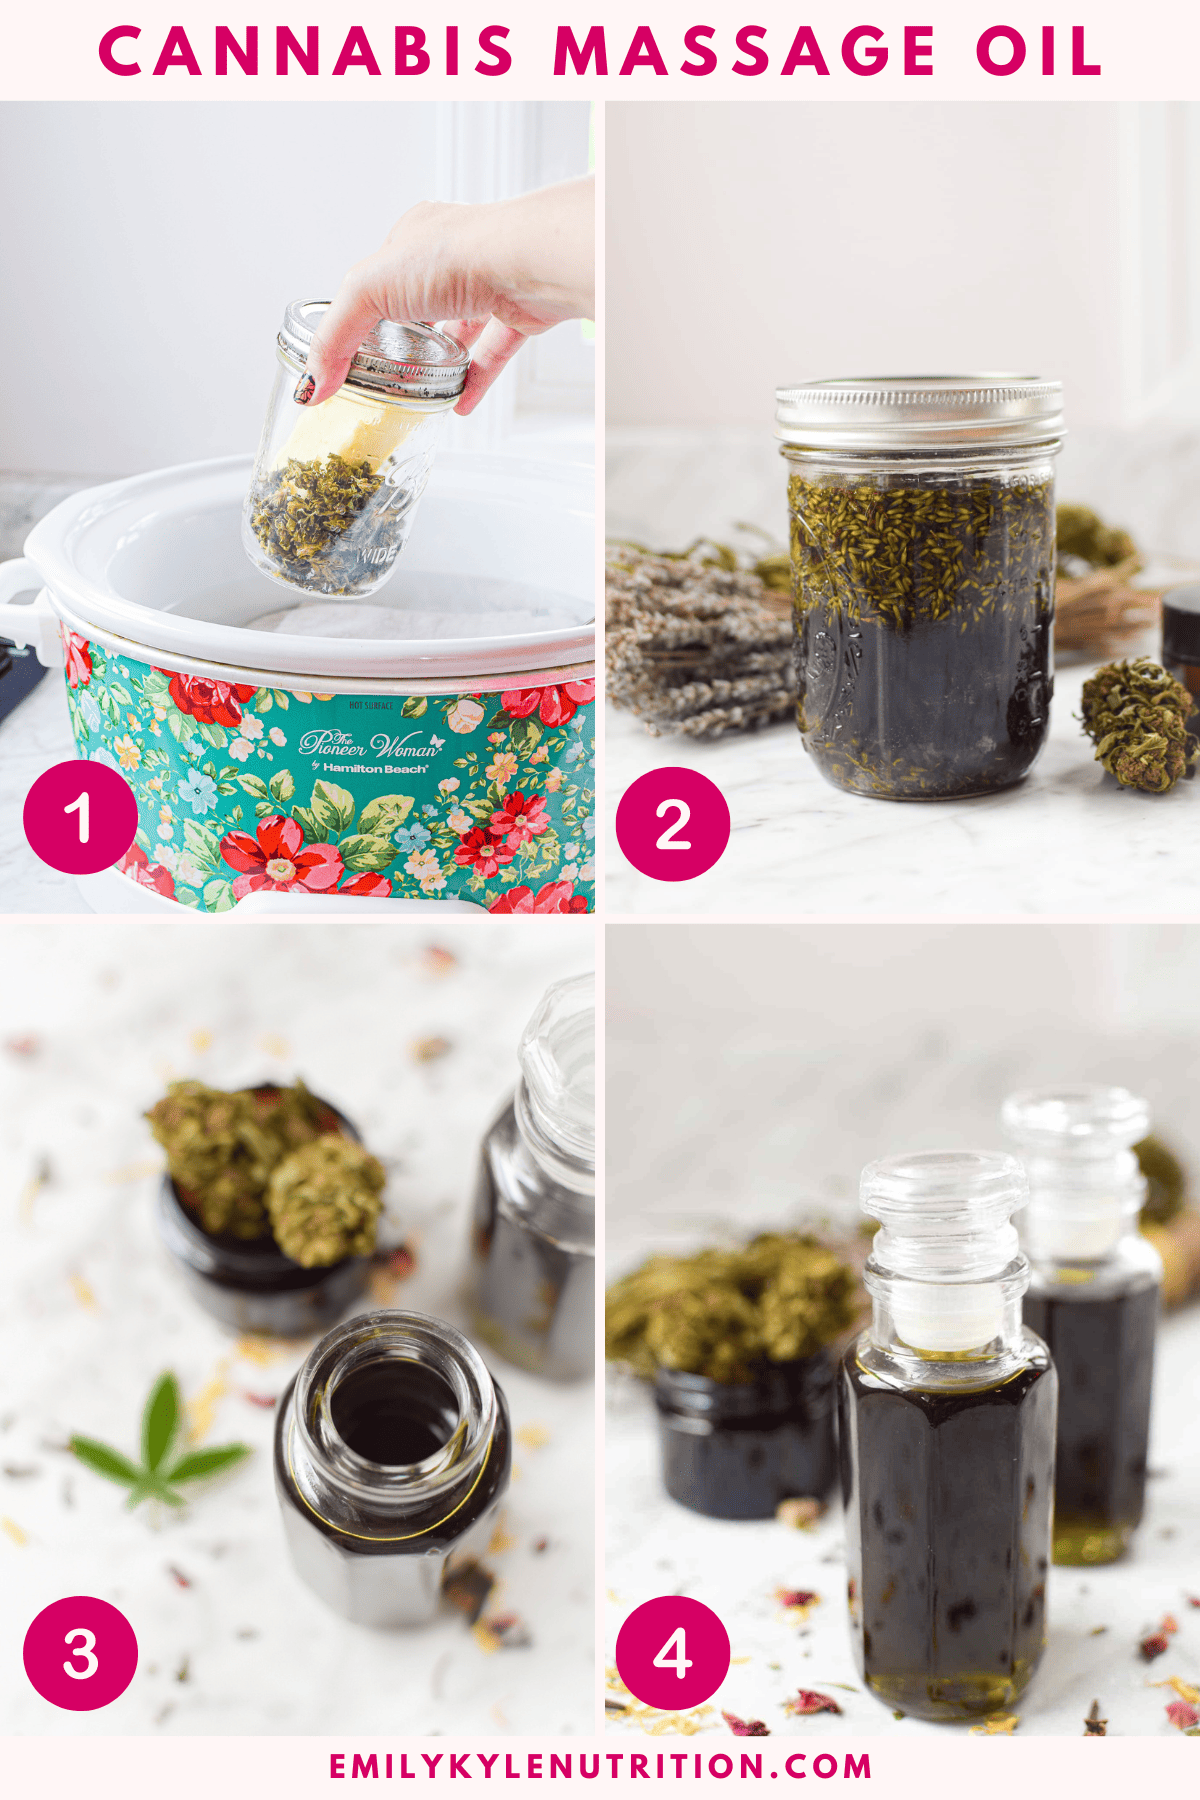 A four step image collage showing how to make cannabis massage oil. 